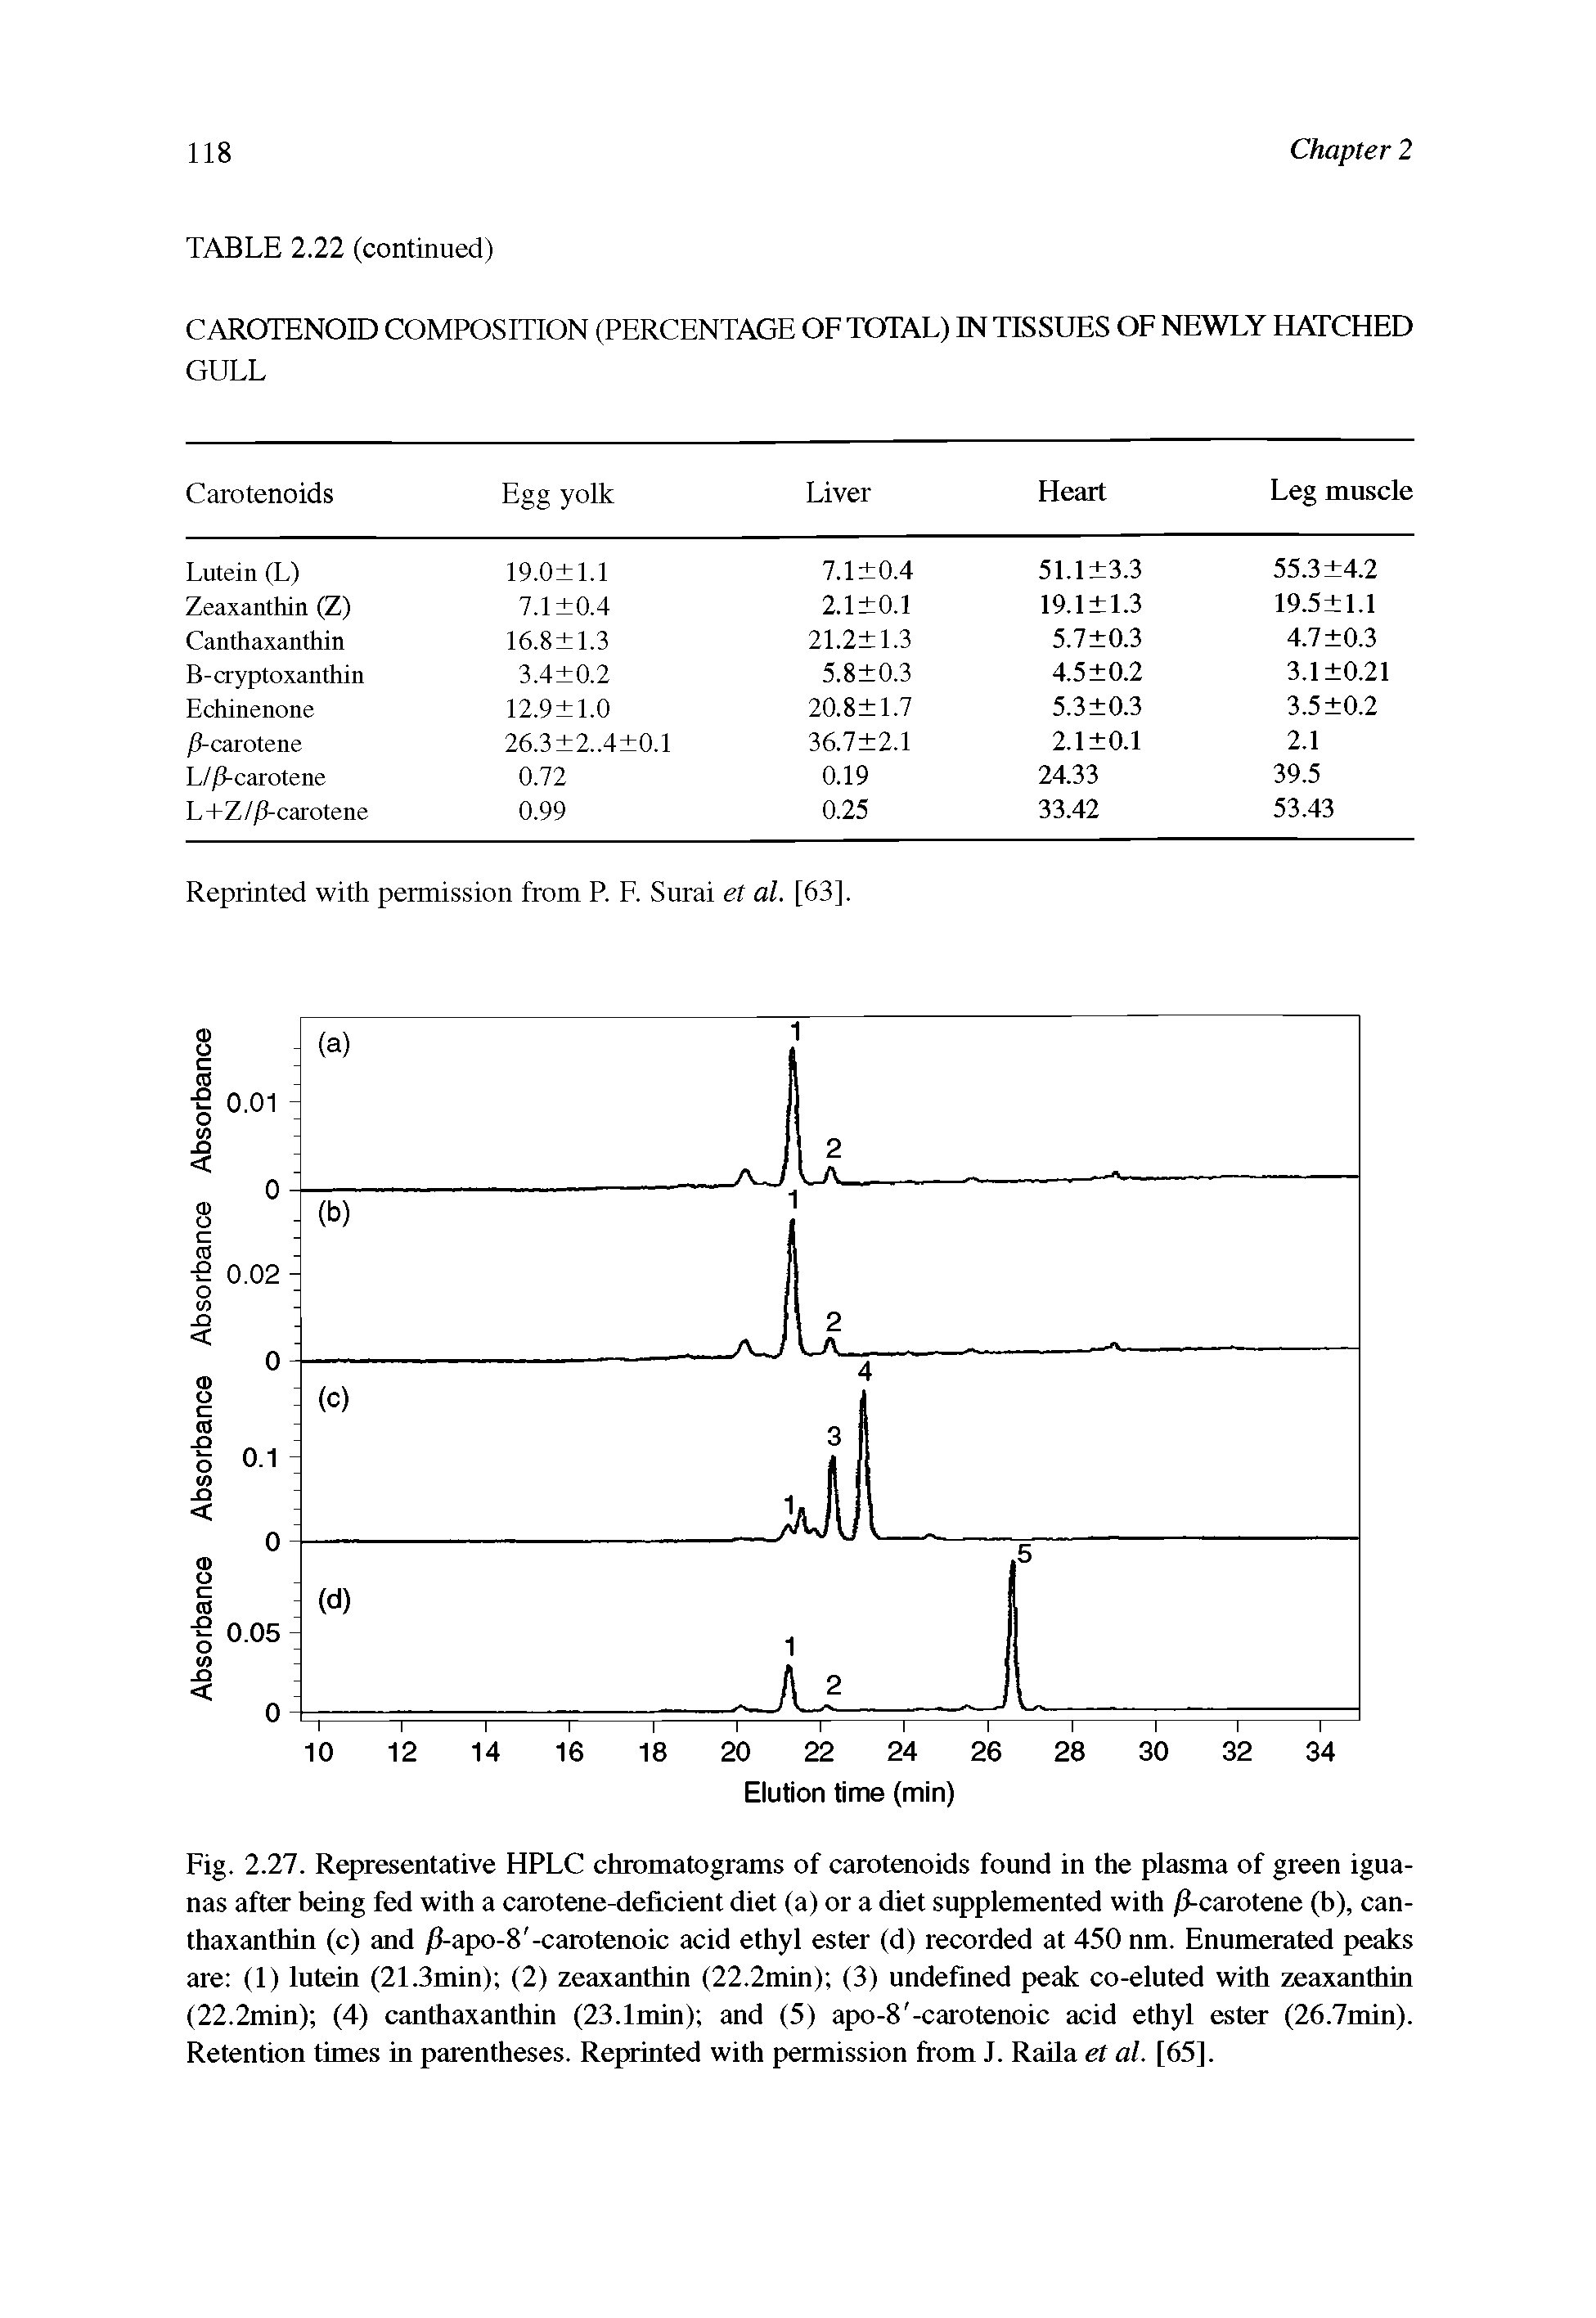 Fig. 2.27. Representative HPLC chromatograms of carotenoids found in the plasma of green iguanas after being fed with a carotene-deficient diet (a) or a diet supplemented with /3-carotene (b), can-thaxanthin (c) and /f-apo-8 -carotenoic acid ethyl ester (d) recorded at 450 nm. Enumerated peaks are (1) lutein (21.3min) (2) zeaxanthin (22.2min) (3) undefined peak co-eluted with zeaxanthin (22.2min) (4) canthaxanthin (23.1min) and (5) apo-8 -carotenoic acid ethyl ester (26.7min). Retention times in parentheses. Reprinted with permission from J. Raila et al. [65],...